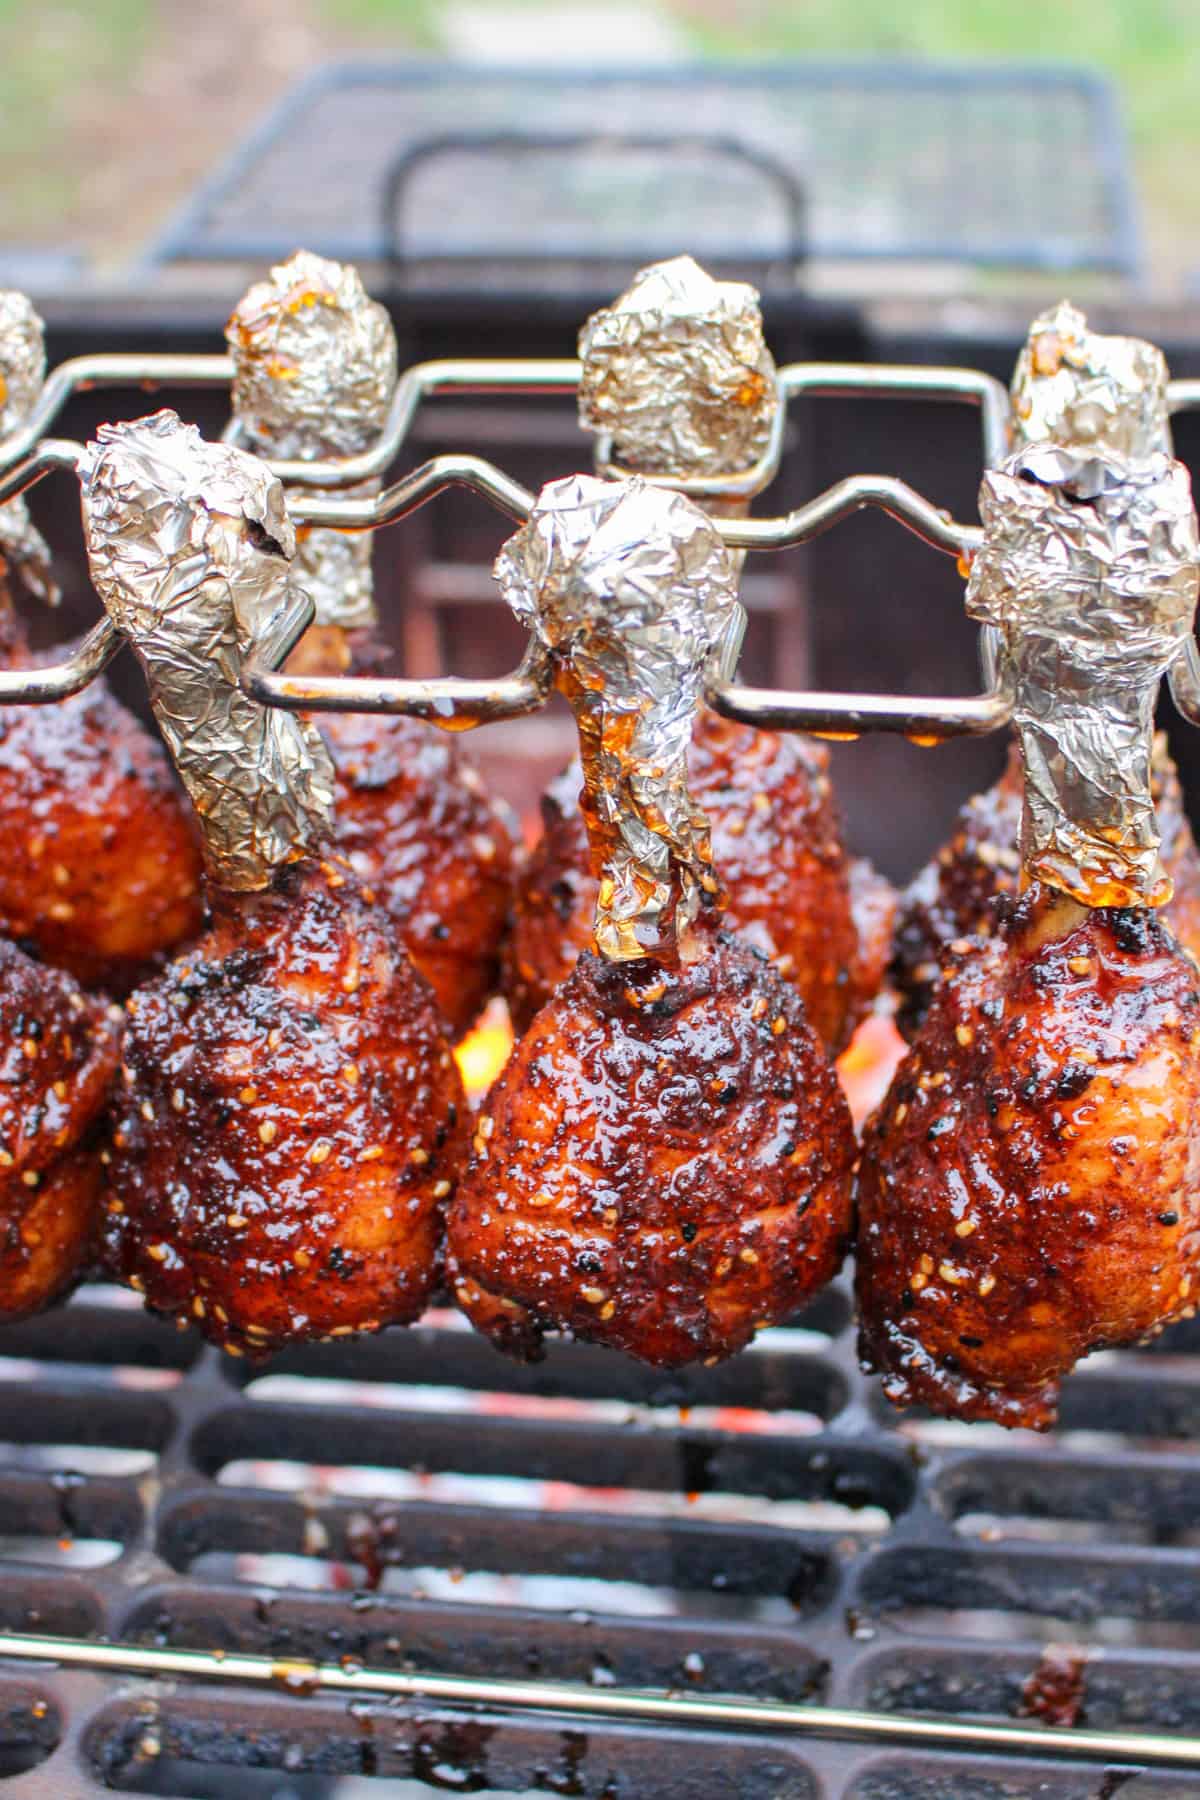 A close up shot of the chicken lollipops after being glazed.